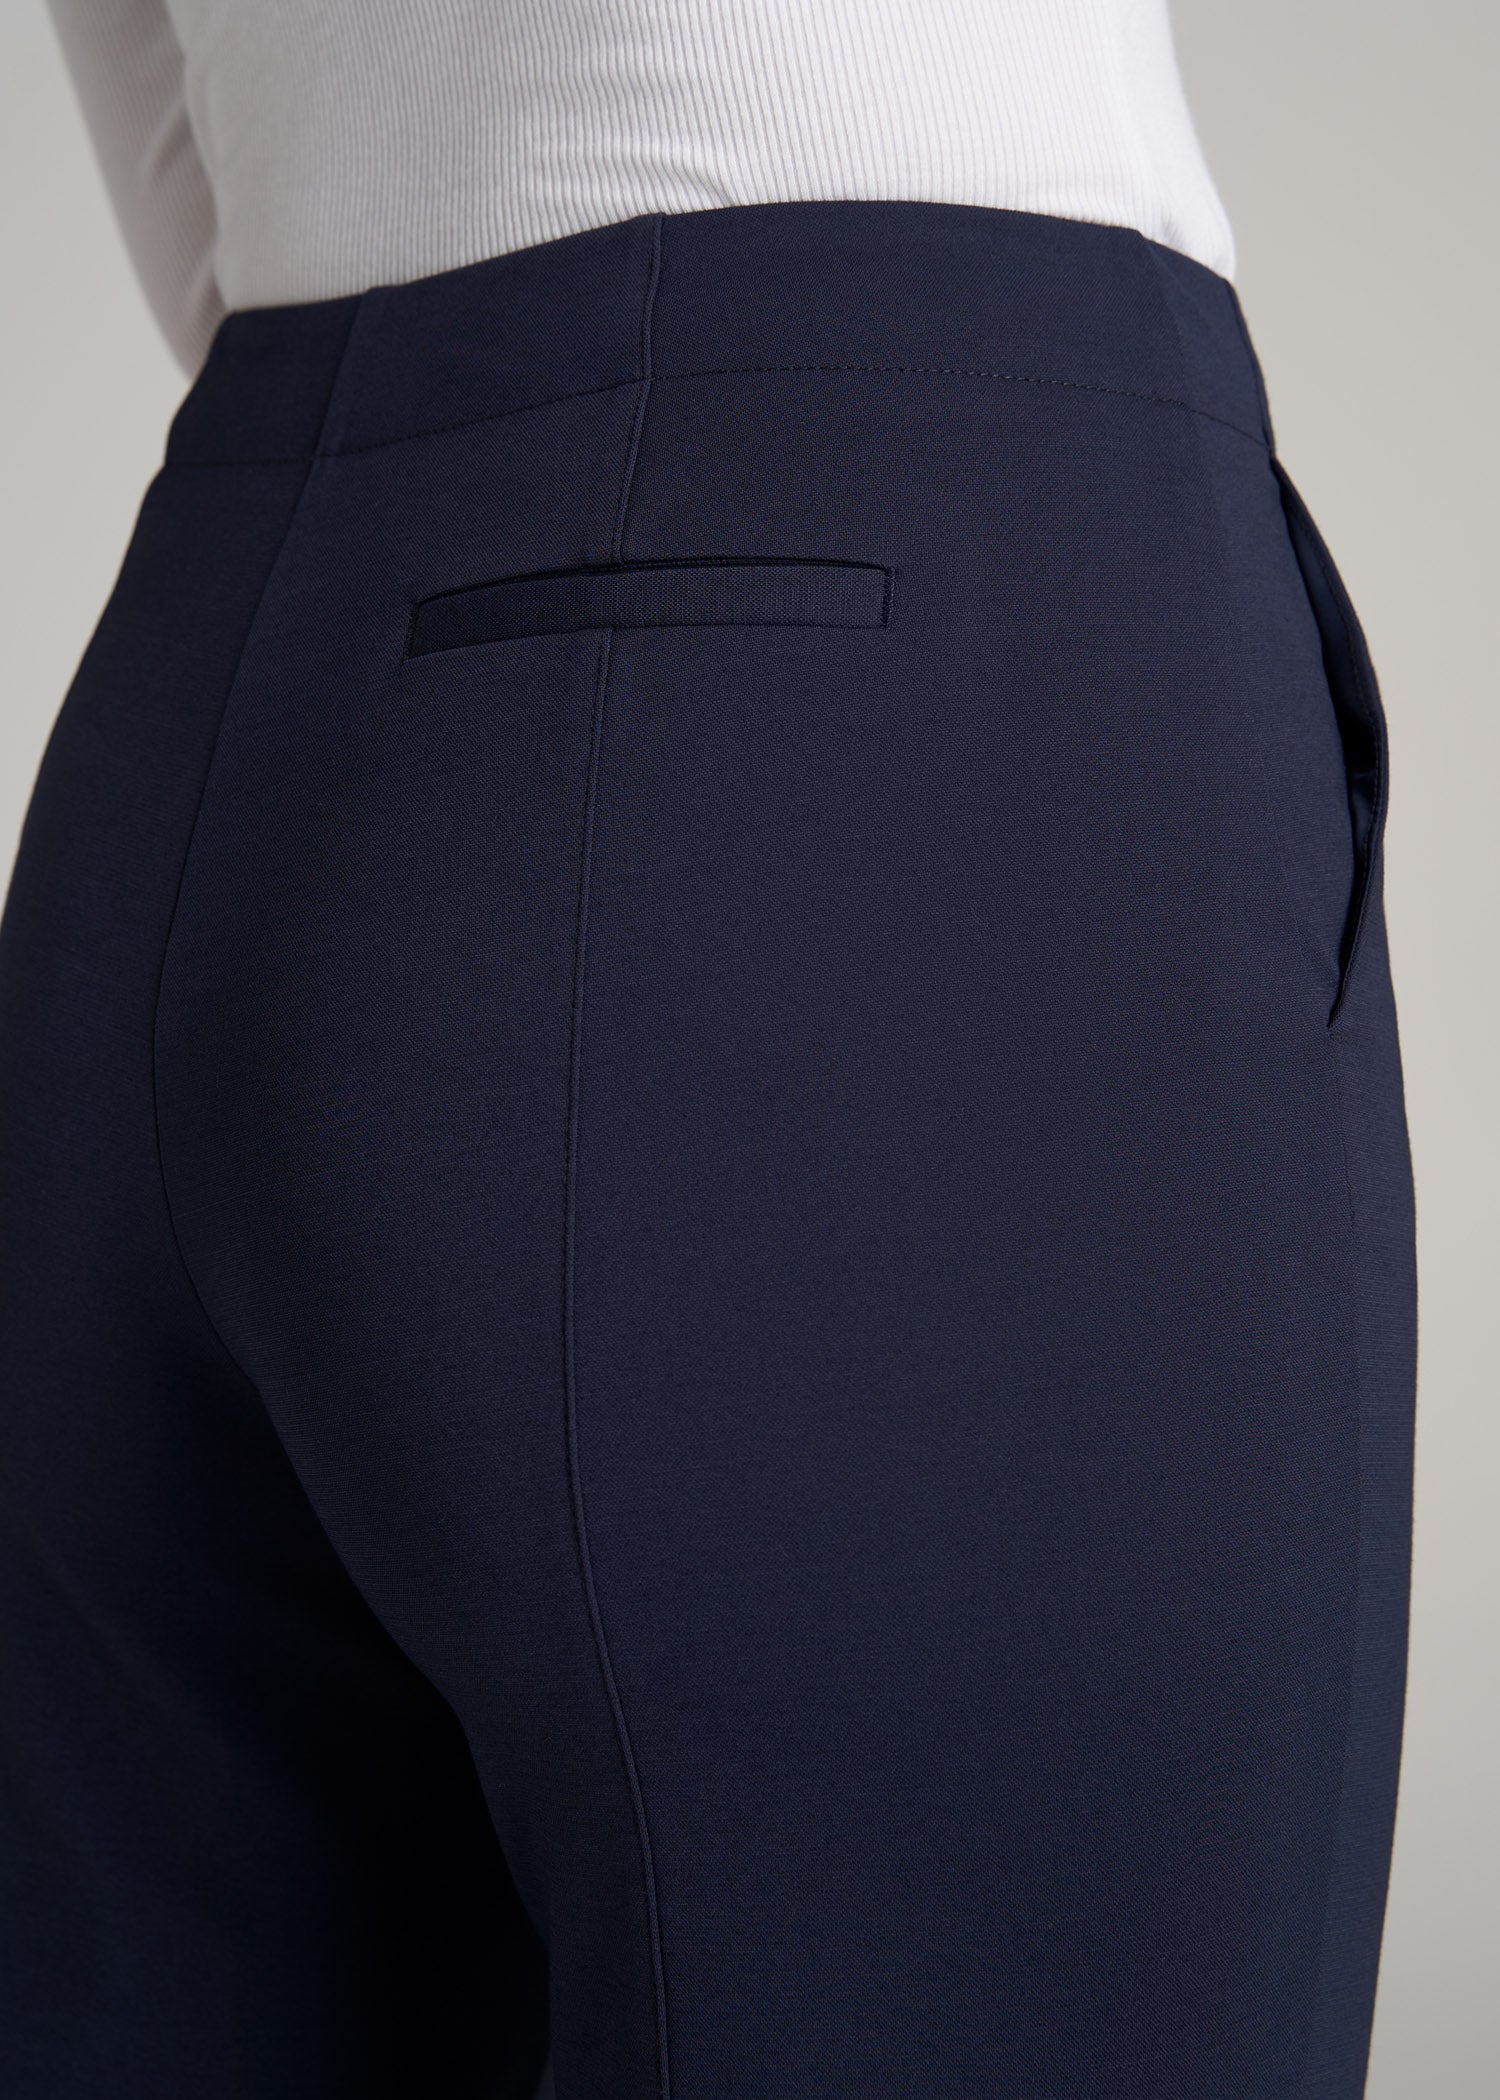 Buy Louis Philippe Navy Trousers Online - 729640 | Louis Philippe